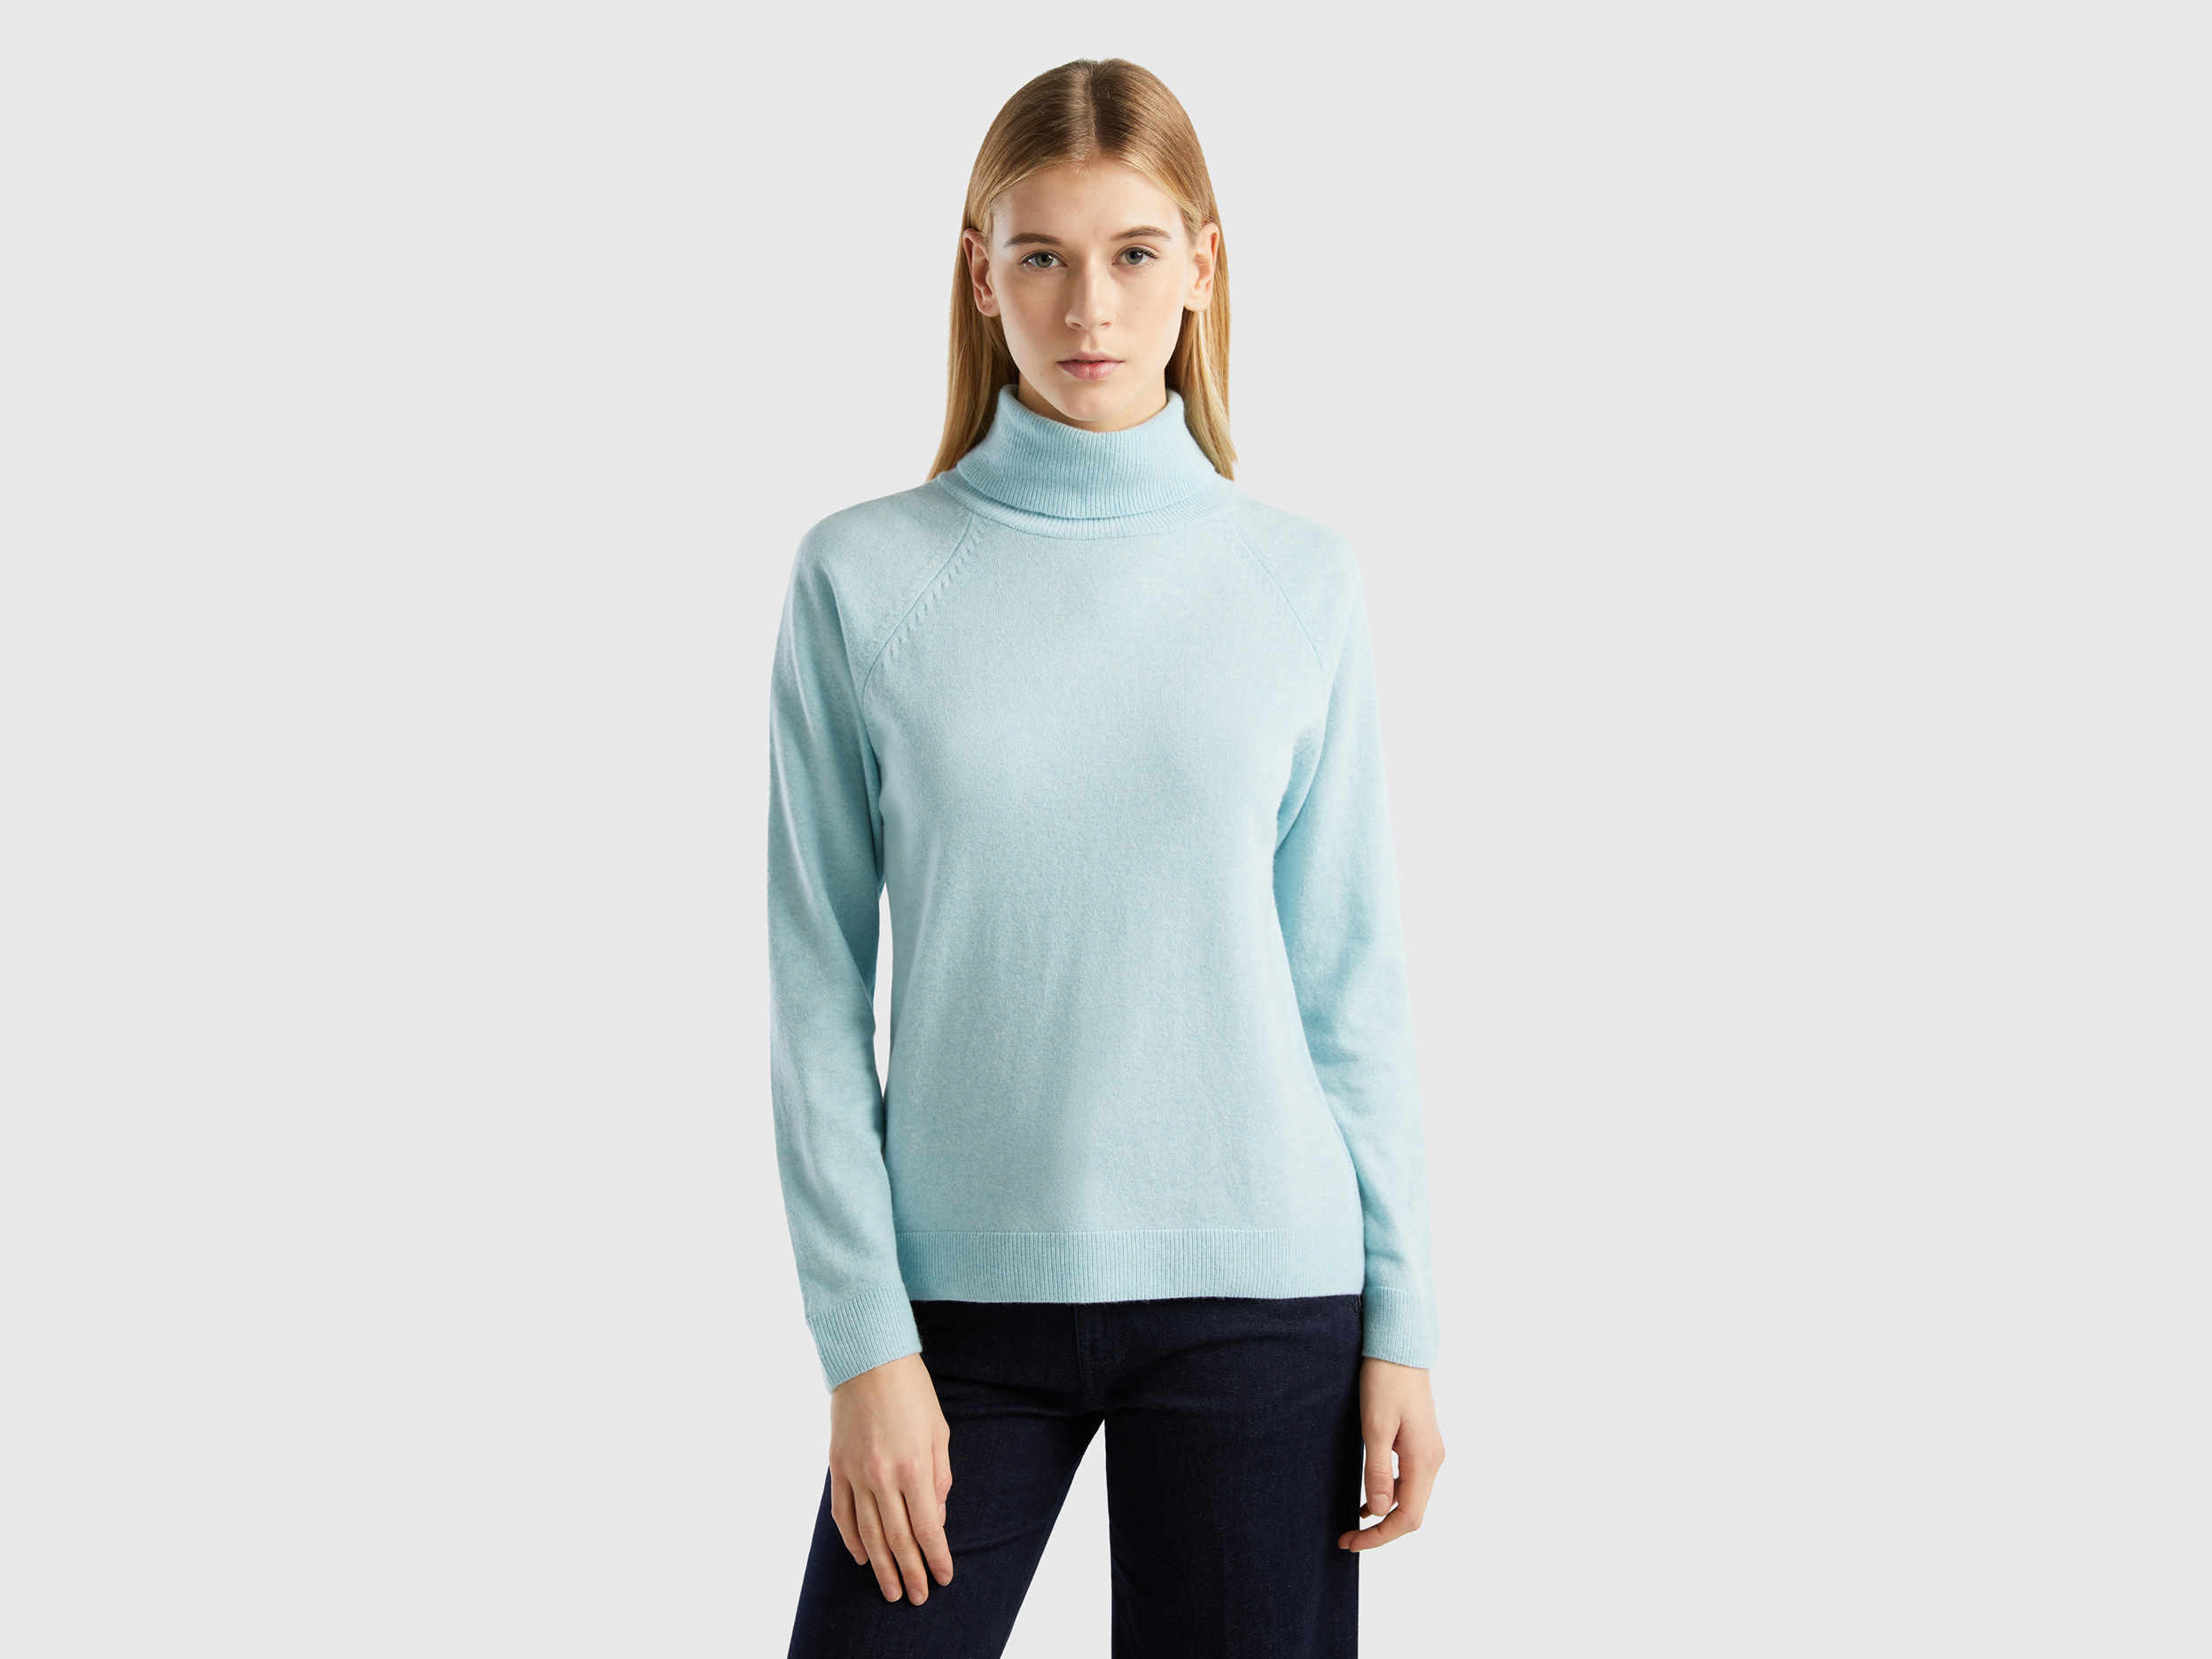 Benetton, Light Gray Turtleneck Sweater In Cashmere And Wool Blend, size XS, Light Gray, Women